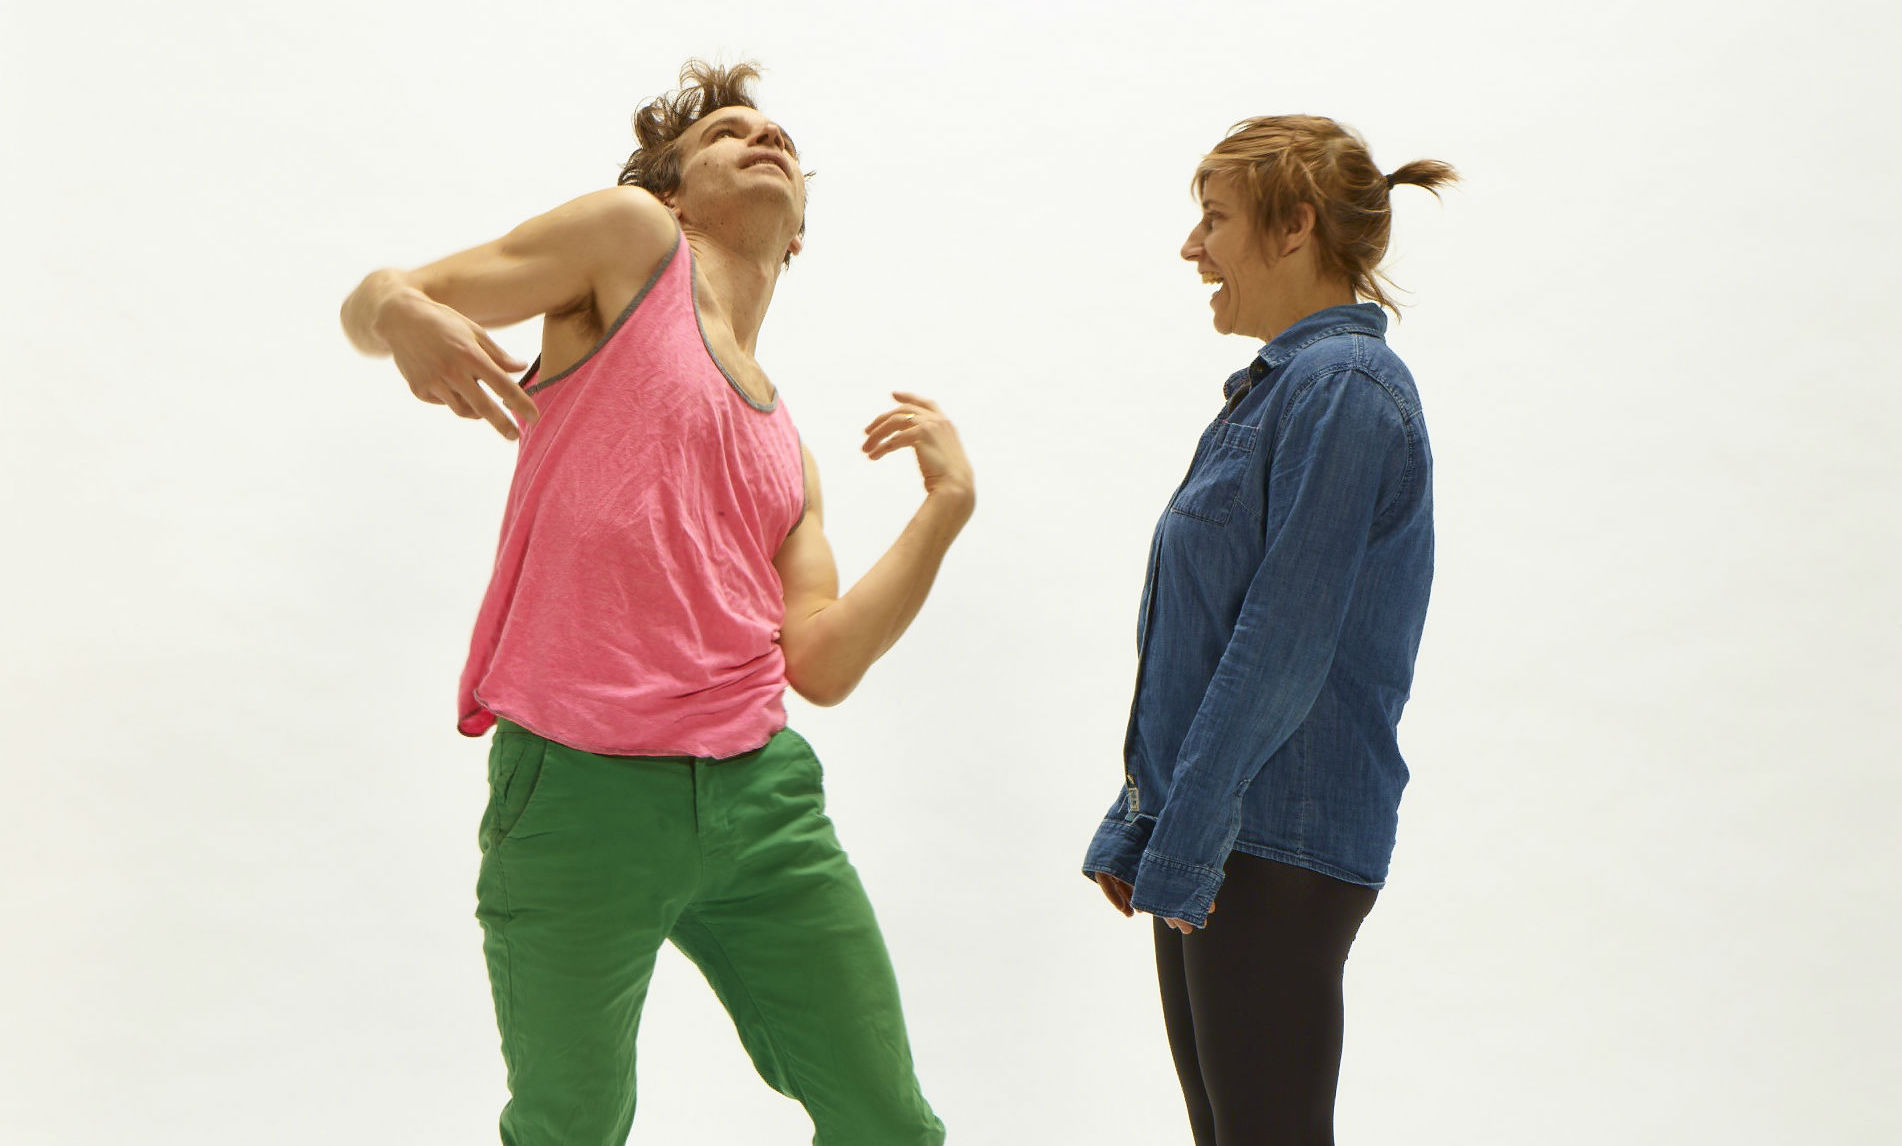 The dance project closer culminates in a big-ass dance party this weekend